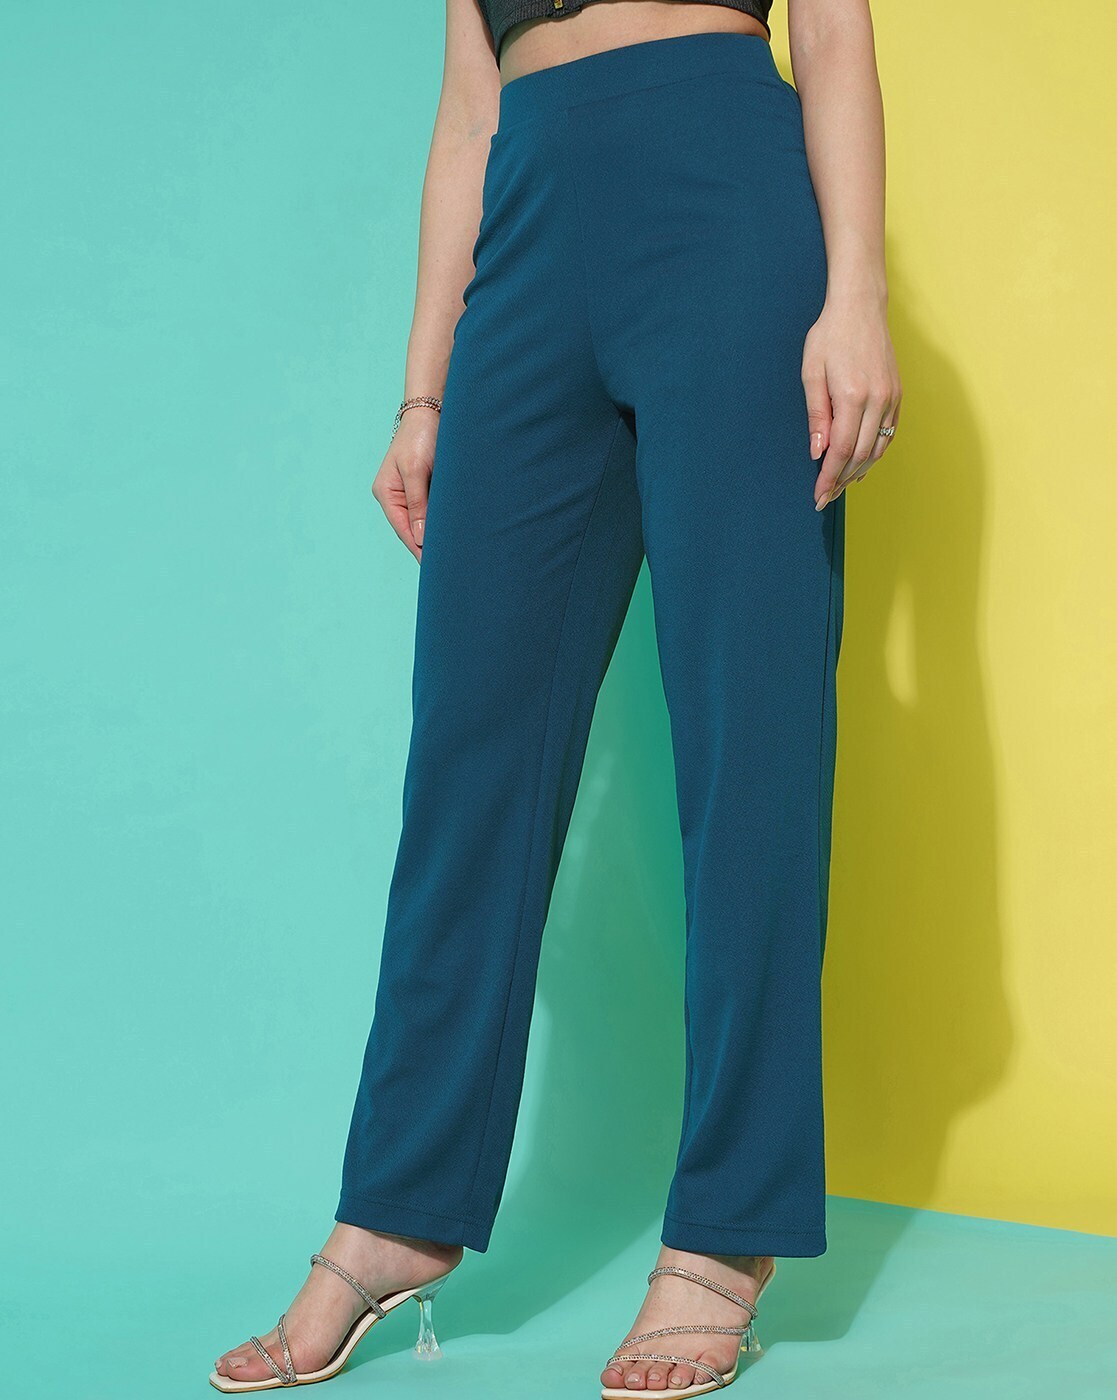 Sophisticated Mulmul Cotton Teal Blue Afghani Pants for women